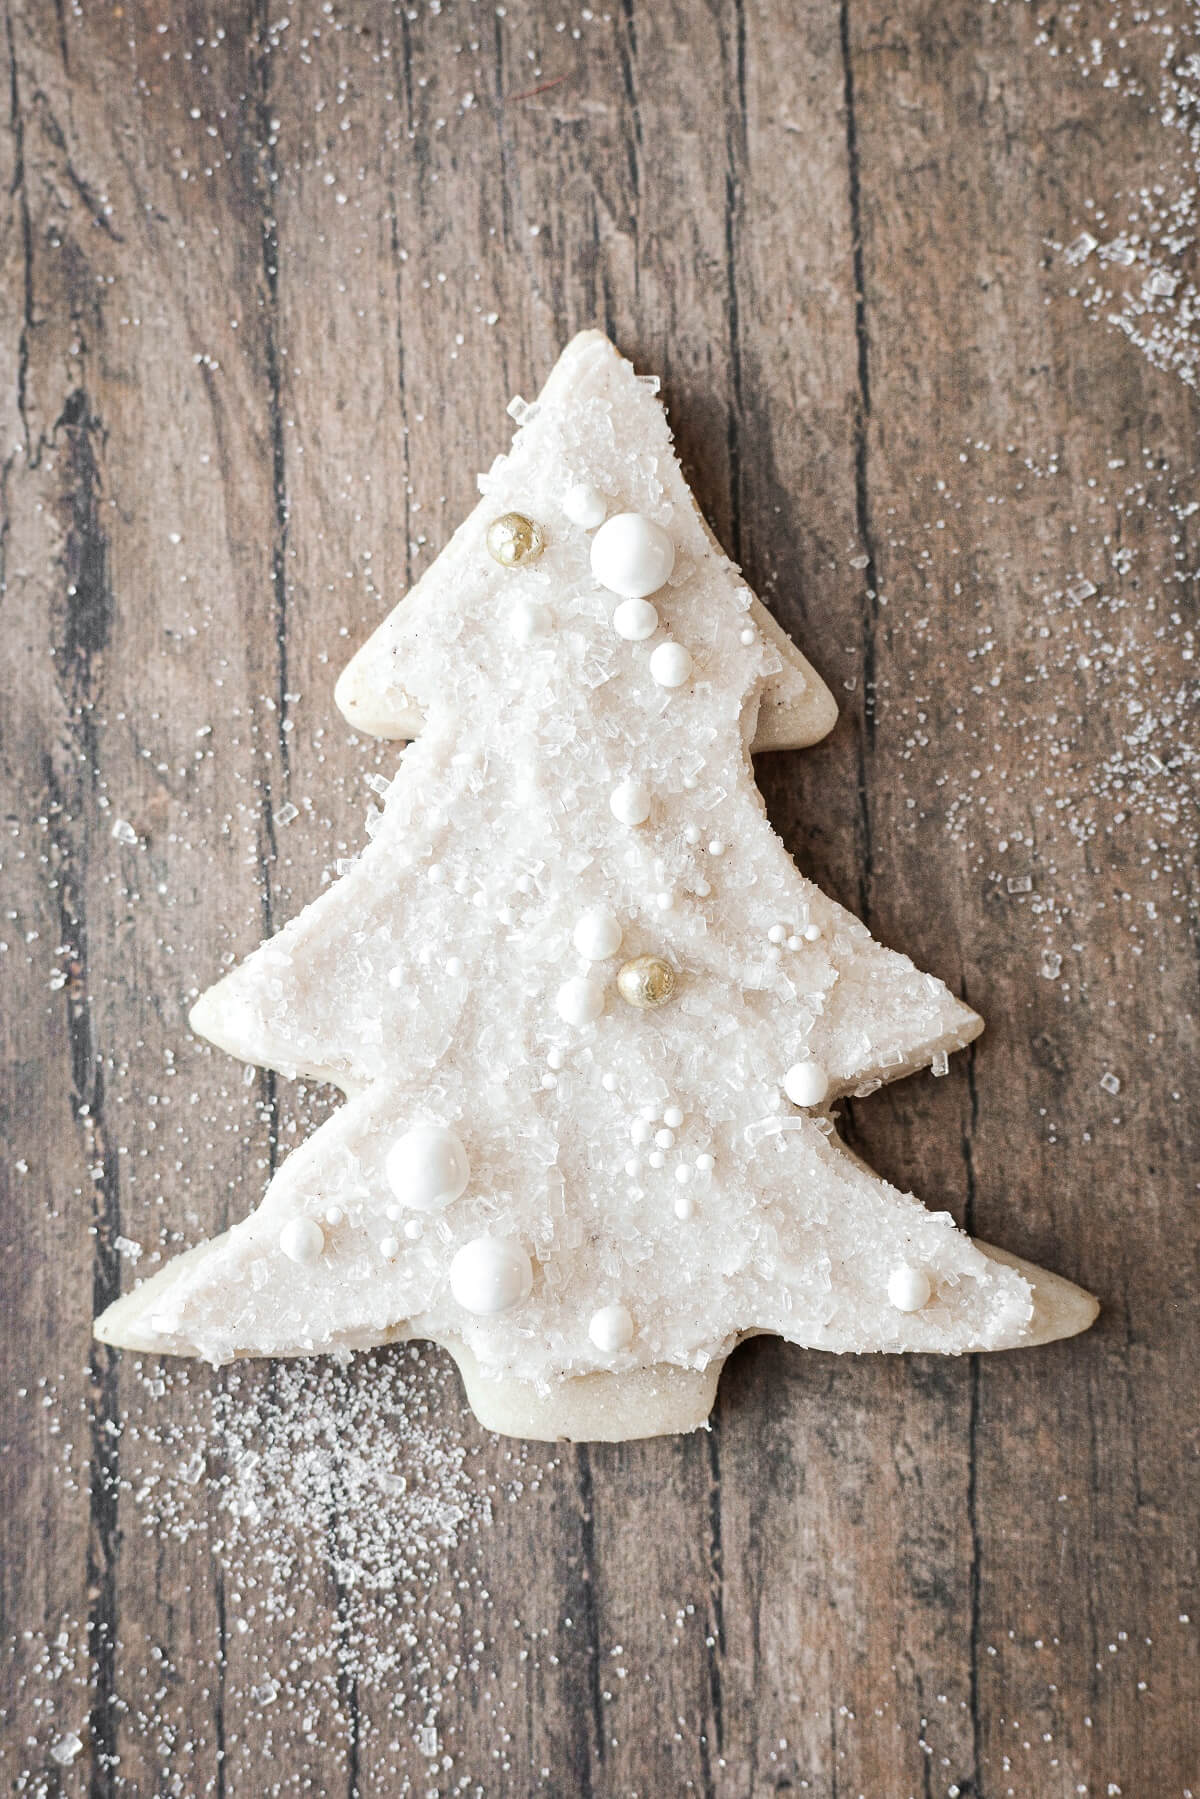 A Christmas tree cookie with sugar pearls and sparkling sugar.